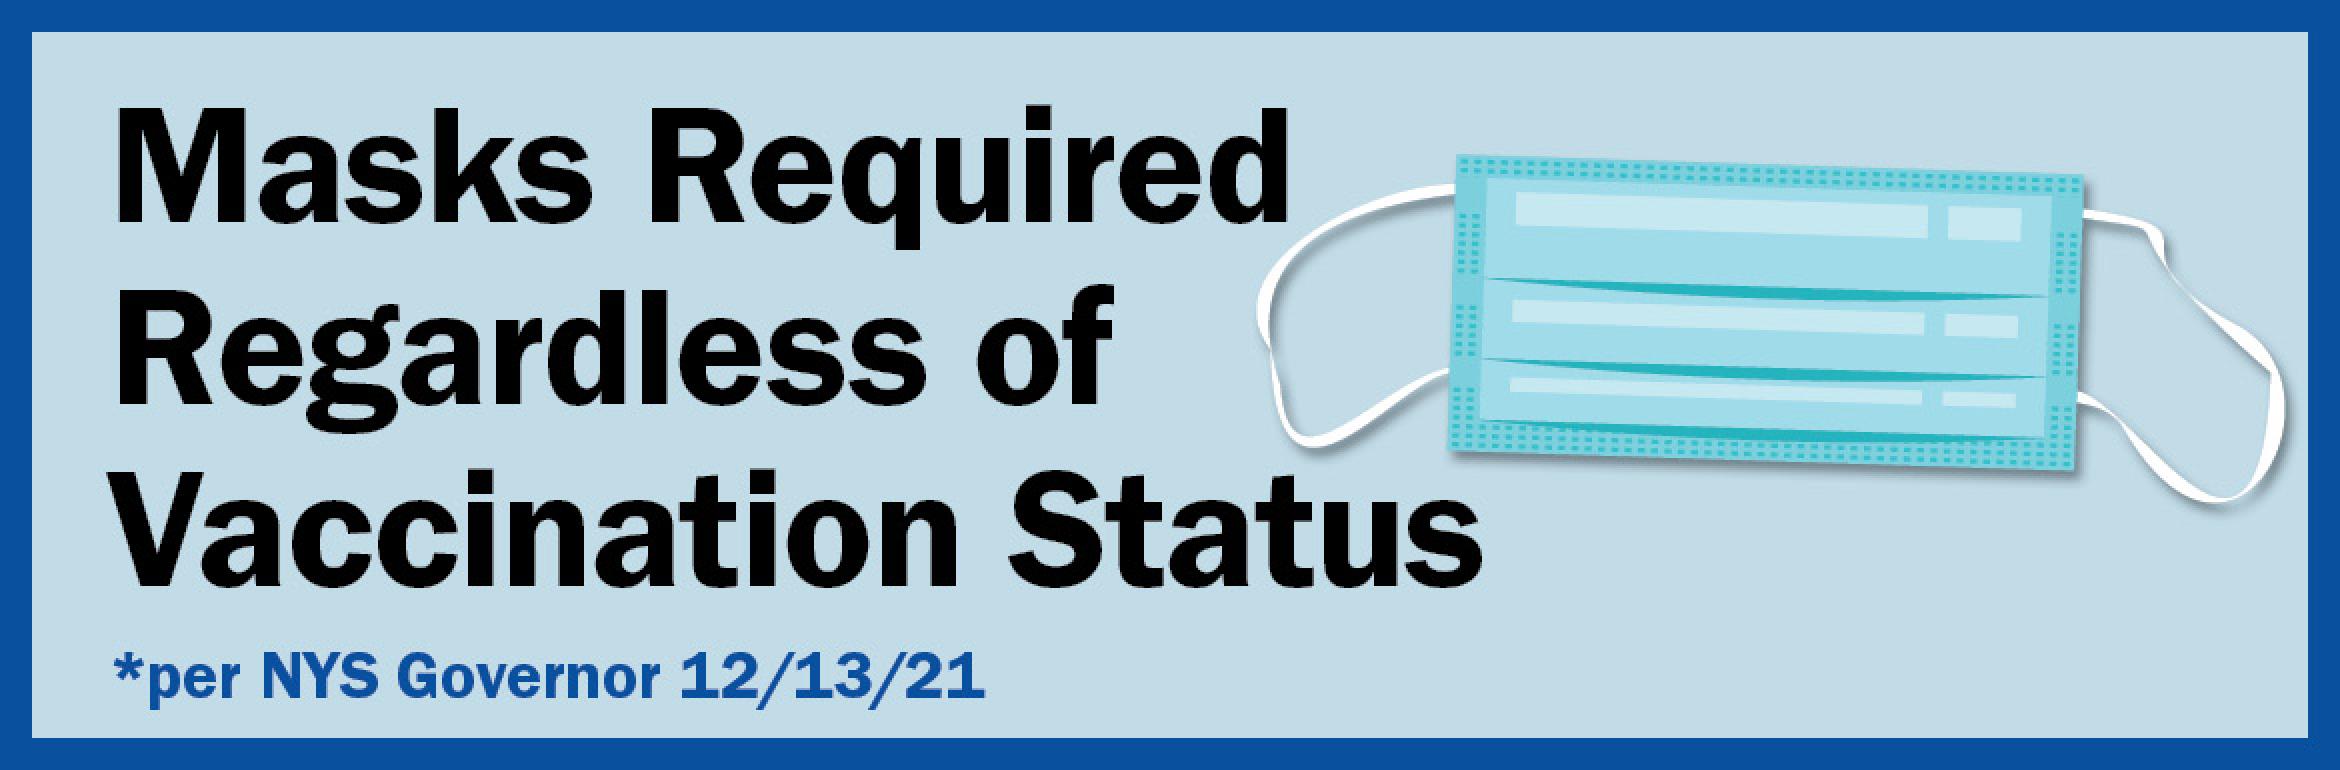 Masks Required Regardless of Vaccination Status *per NYS Governor 12/13/21